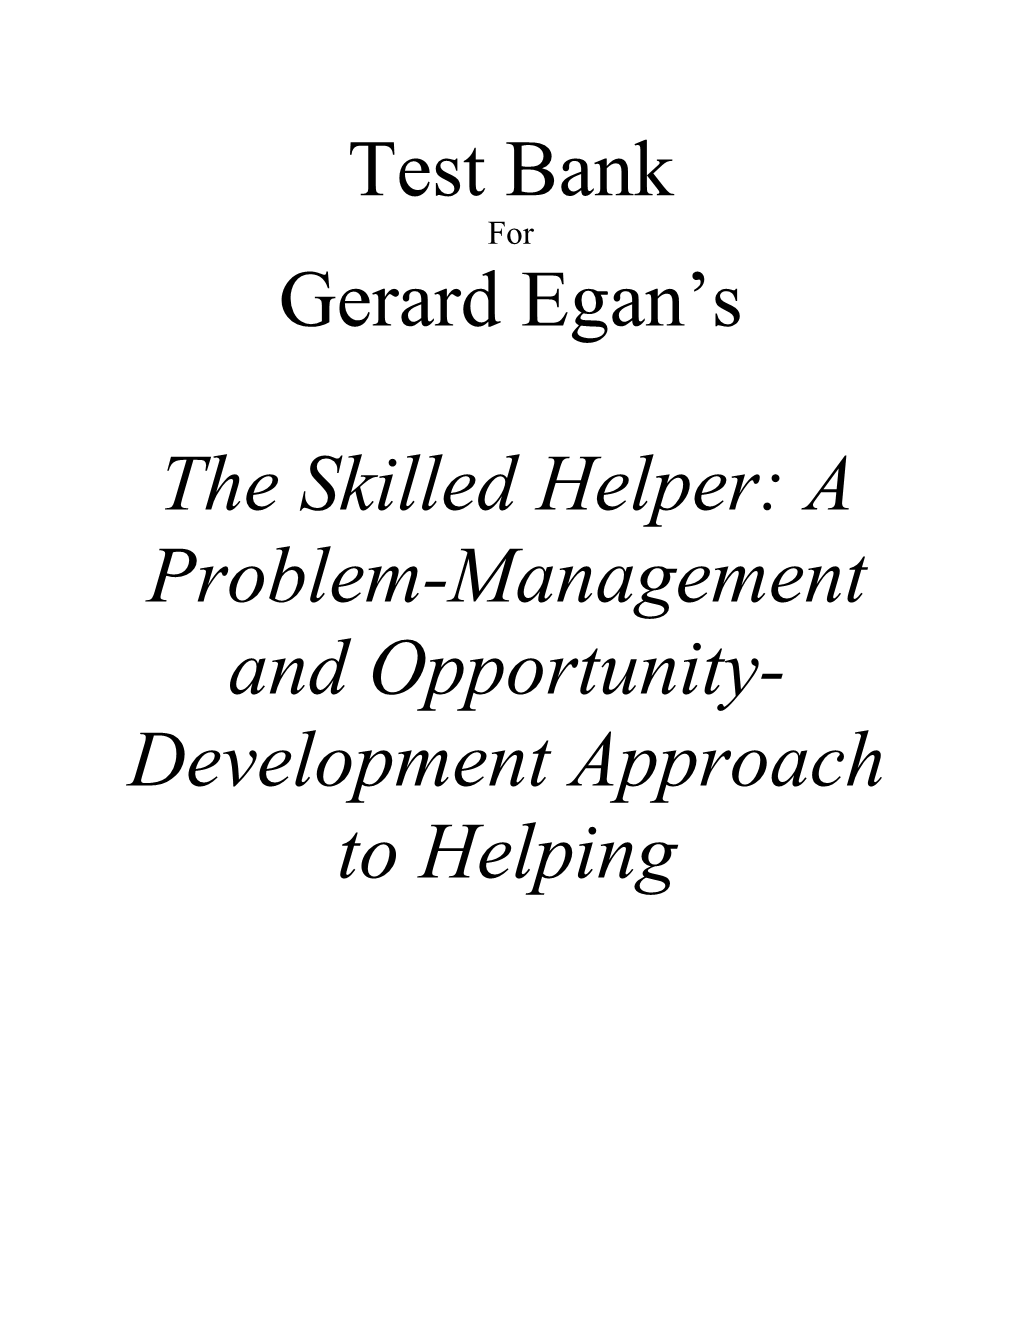 The Skilled Helper: a Problem-Management and Opportunity-Development Approach to Helping